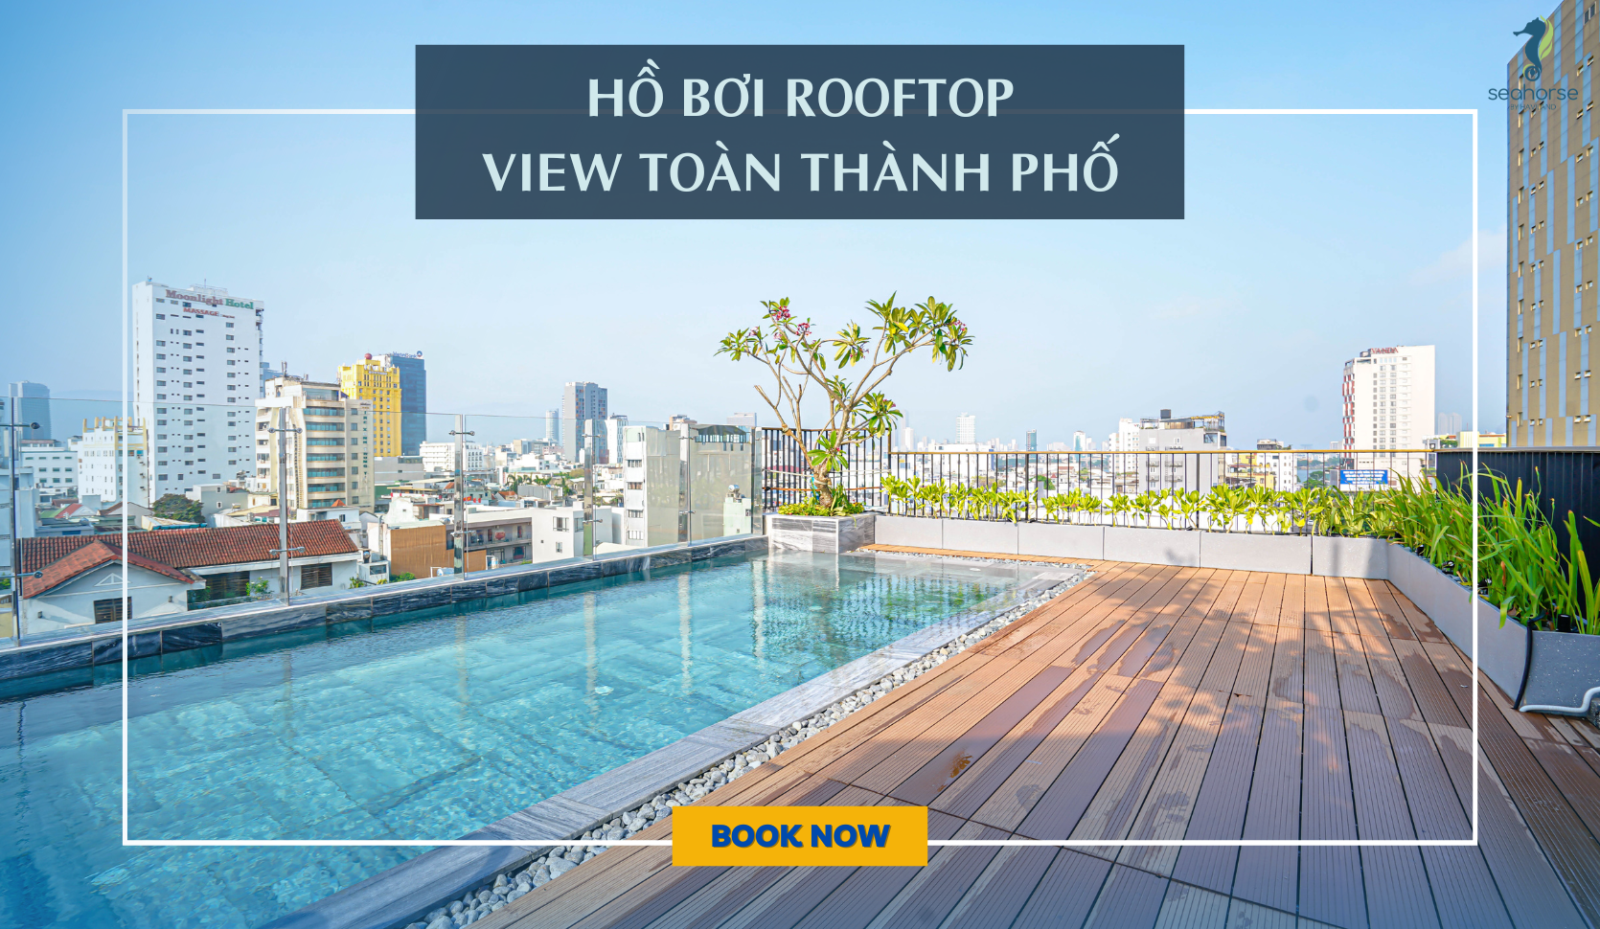 ho-boi-rooftop-view-thanh-pho